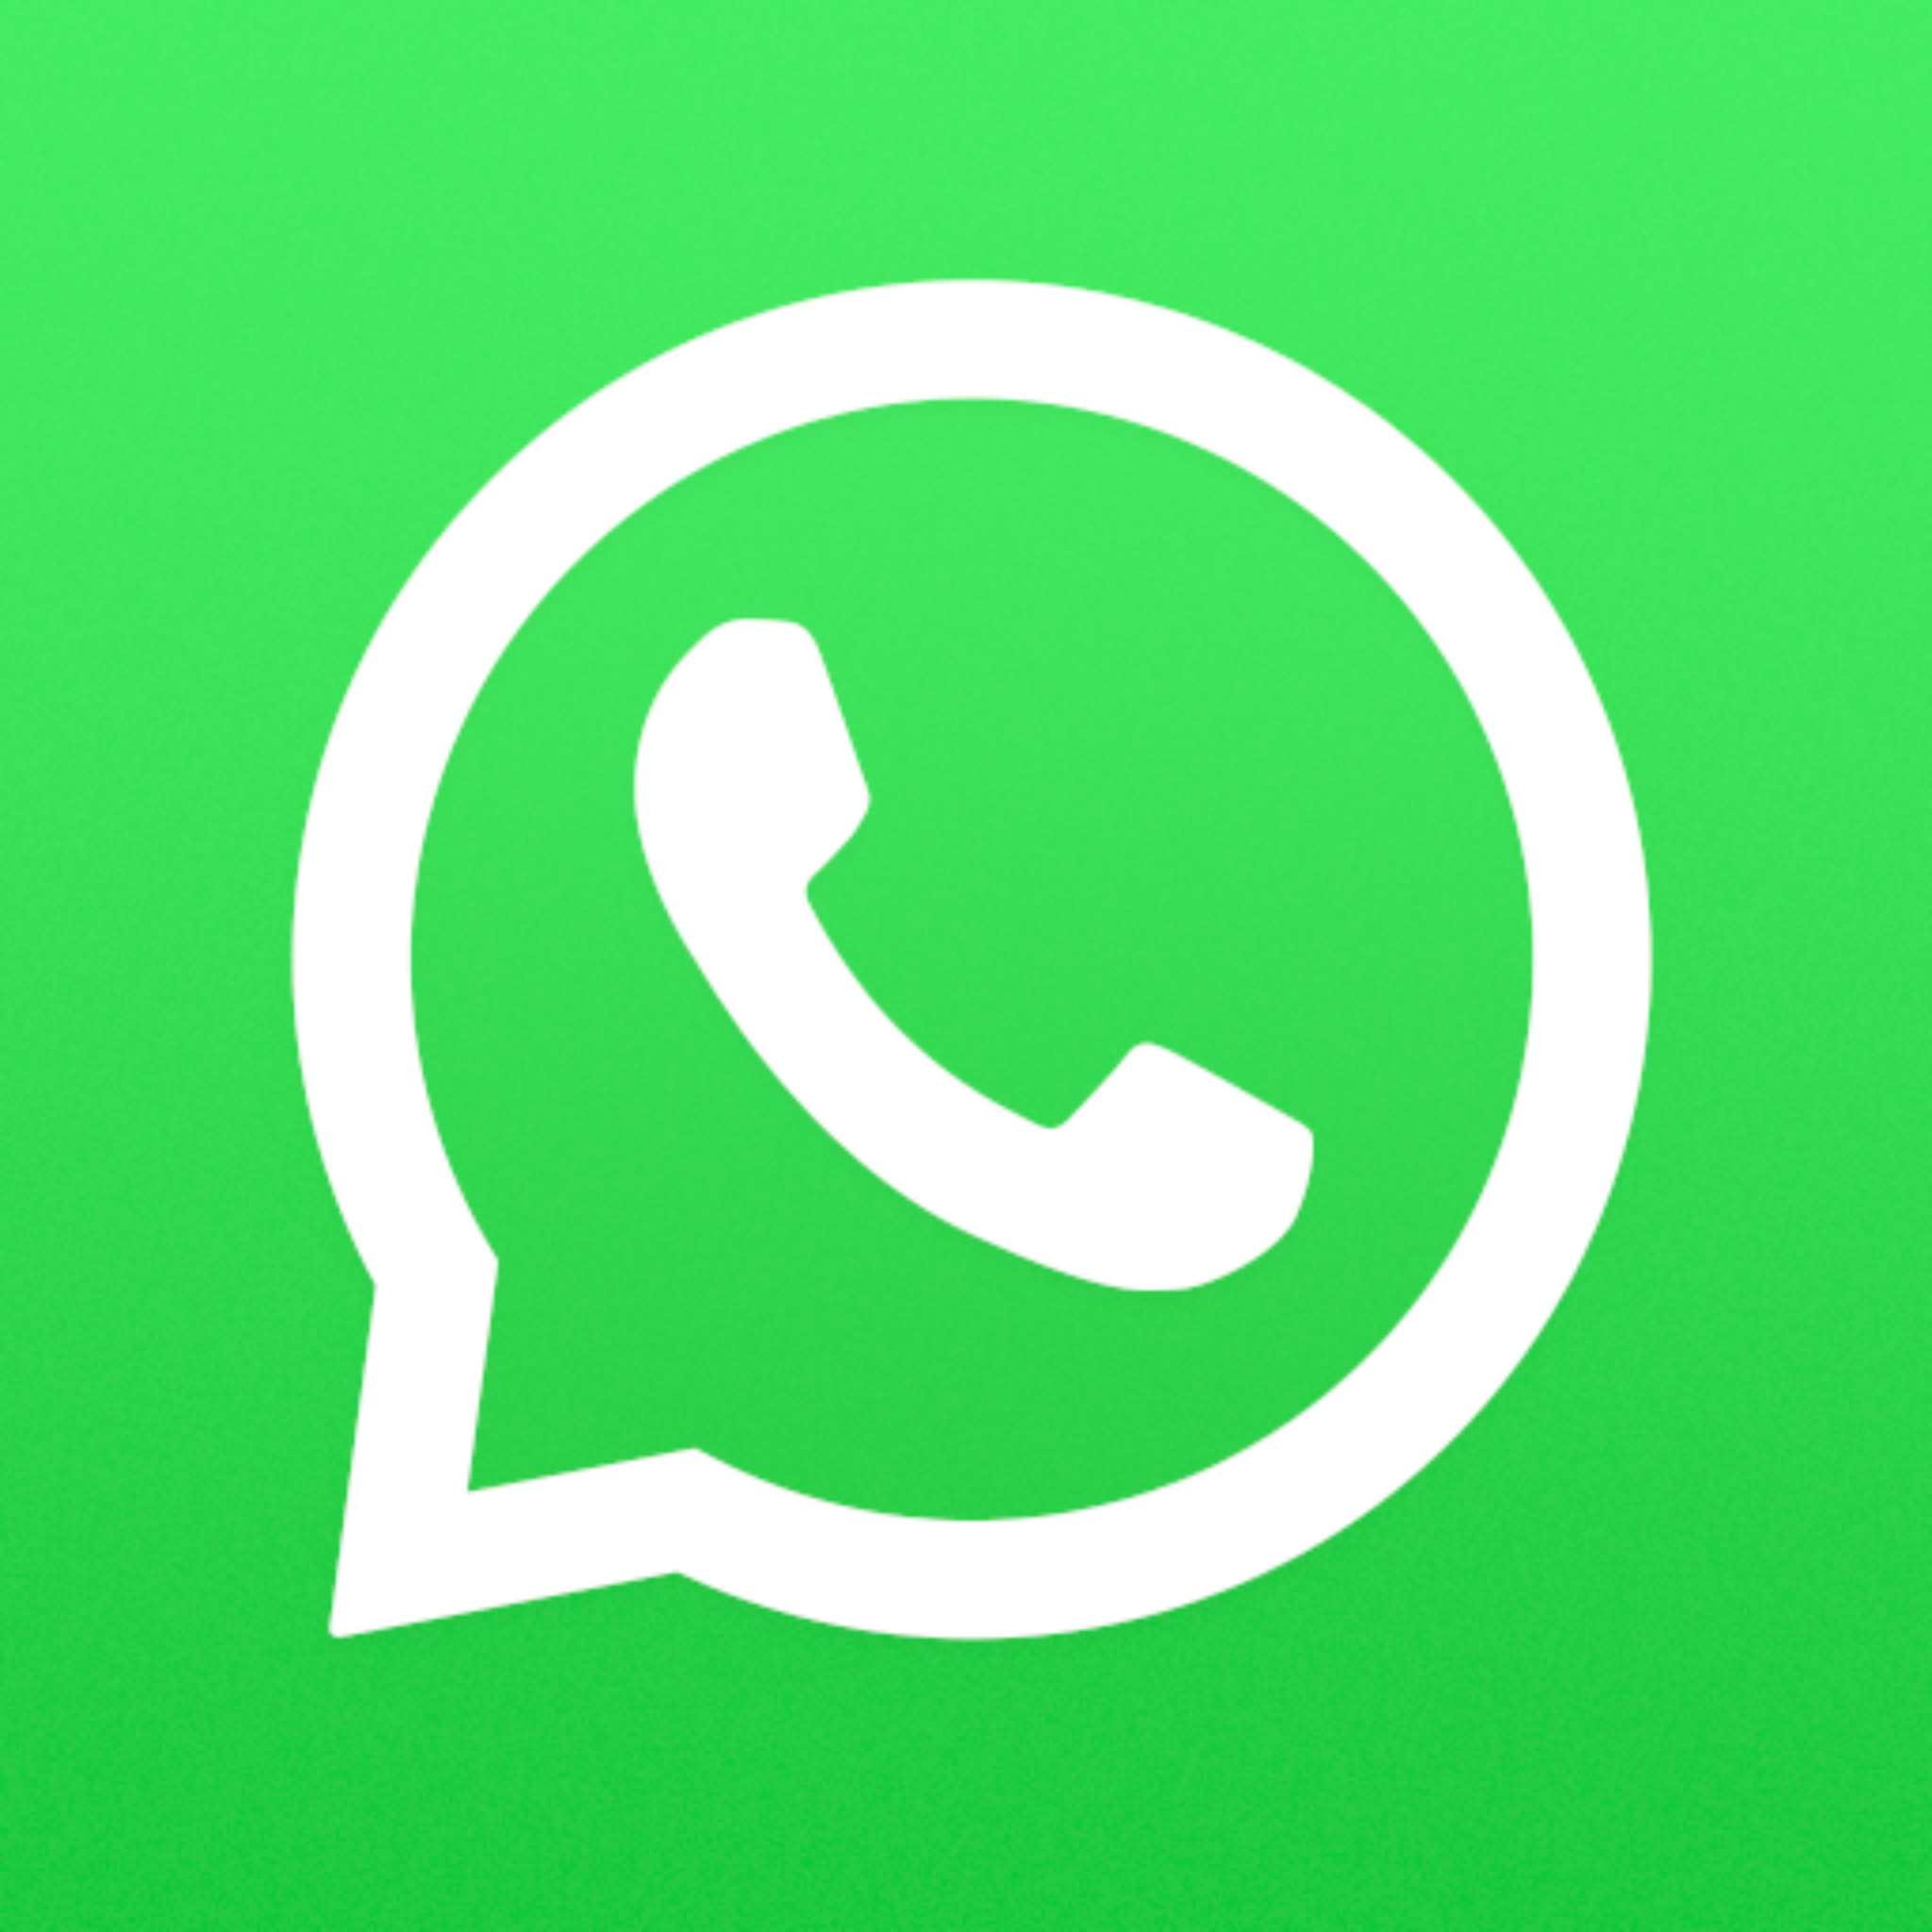 Join the NEW PzDeals WhatsApp Community for The Hottest Freebies and Jaw-Dropping Price Mistakes!